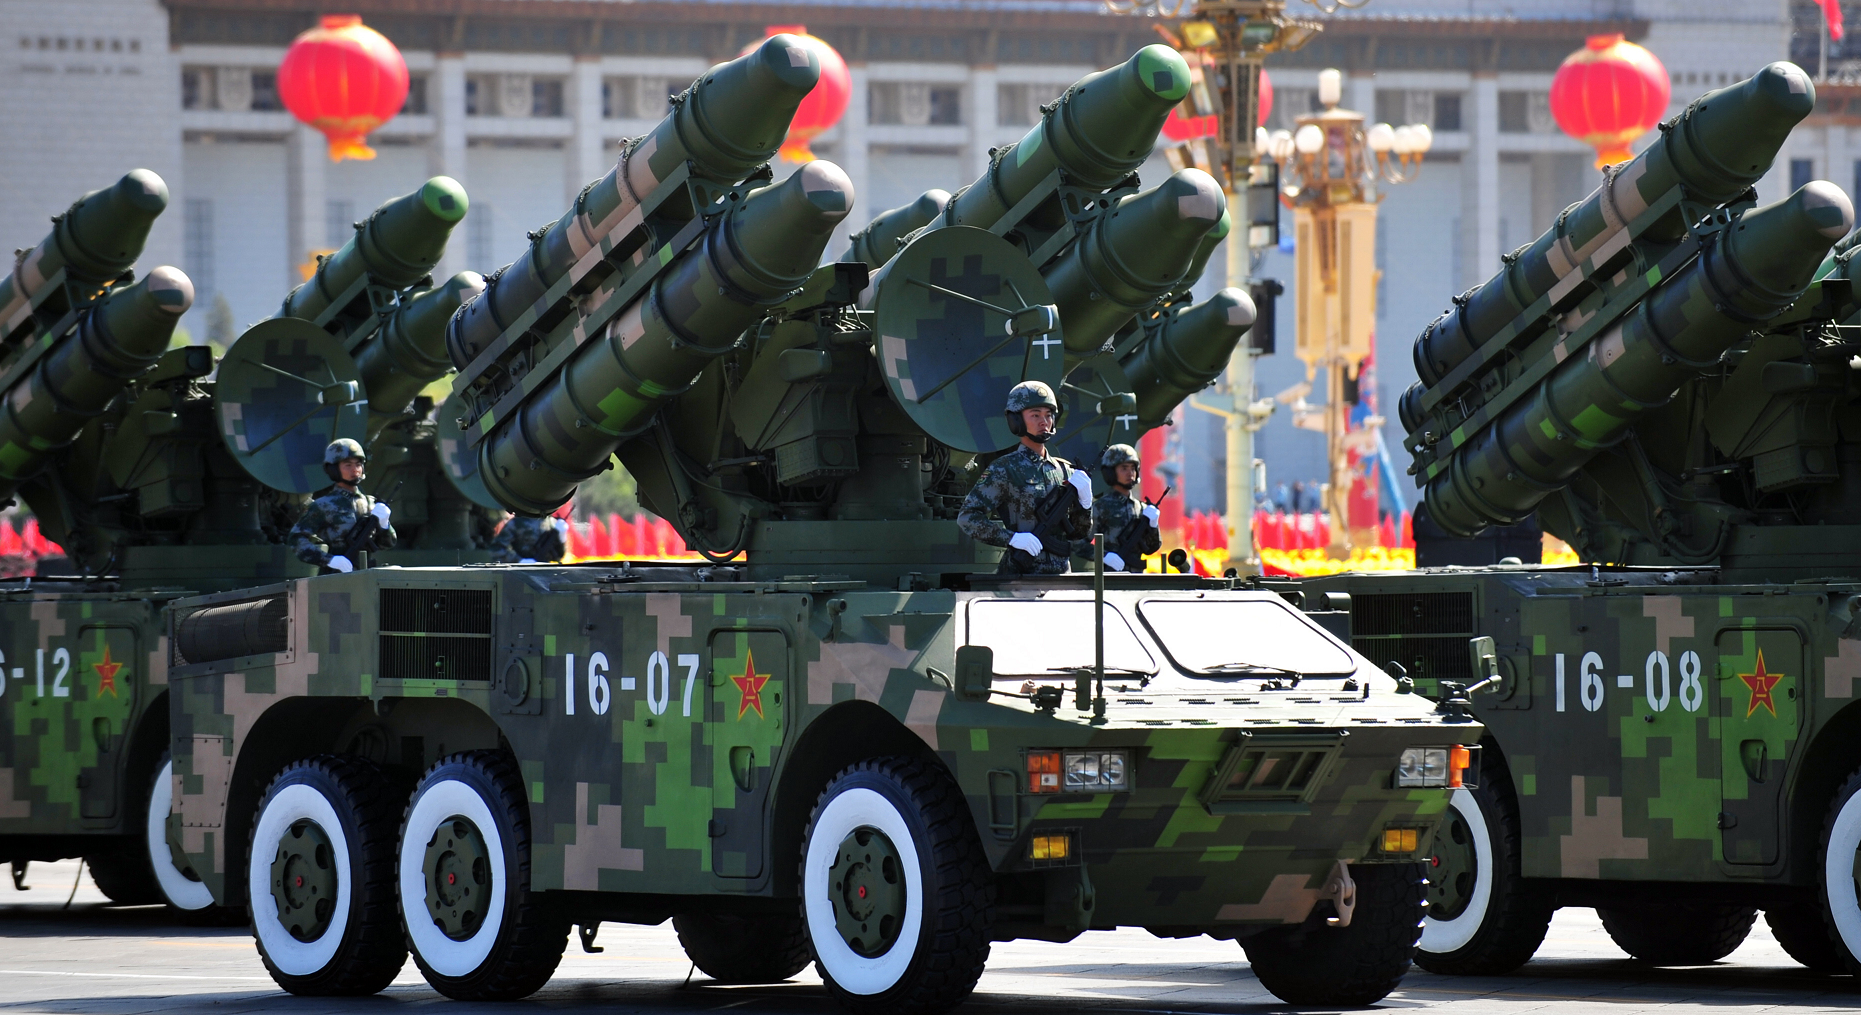 chinesemissile.png